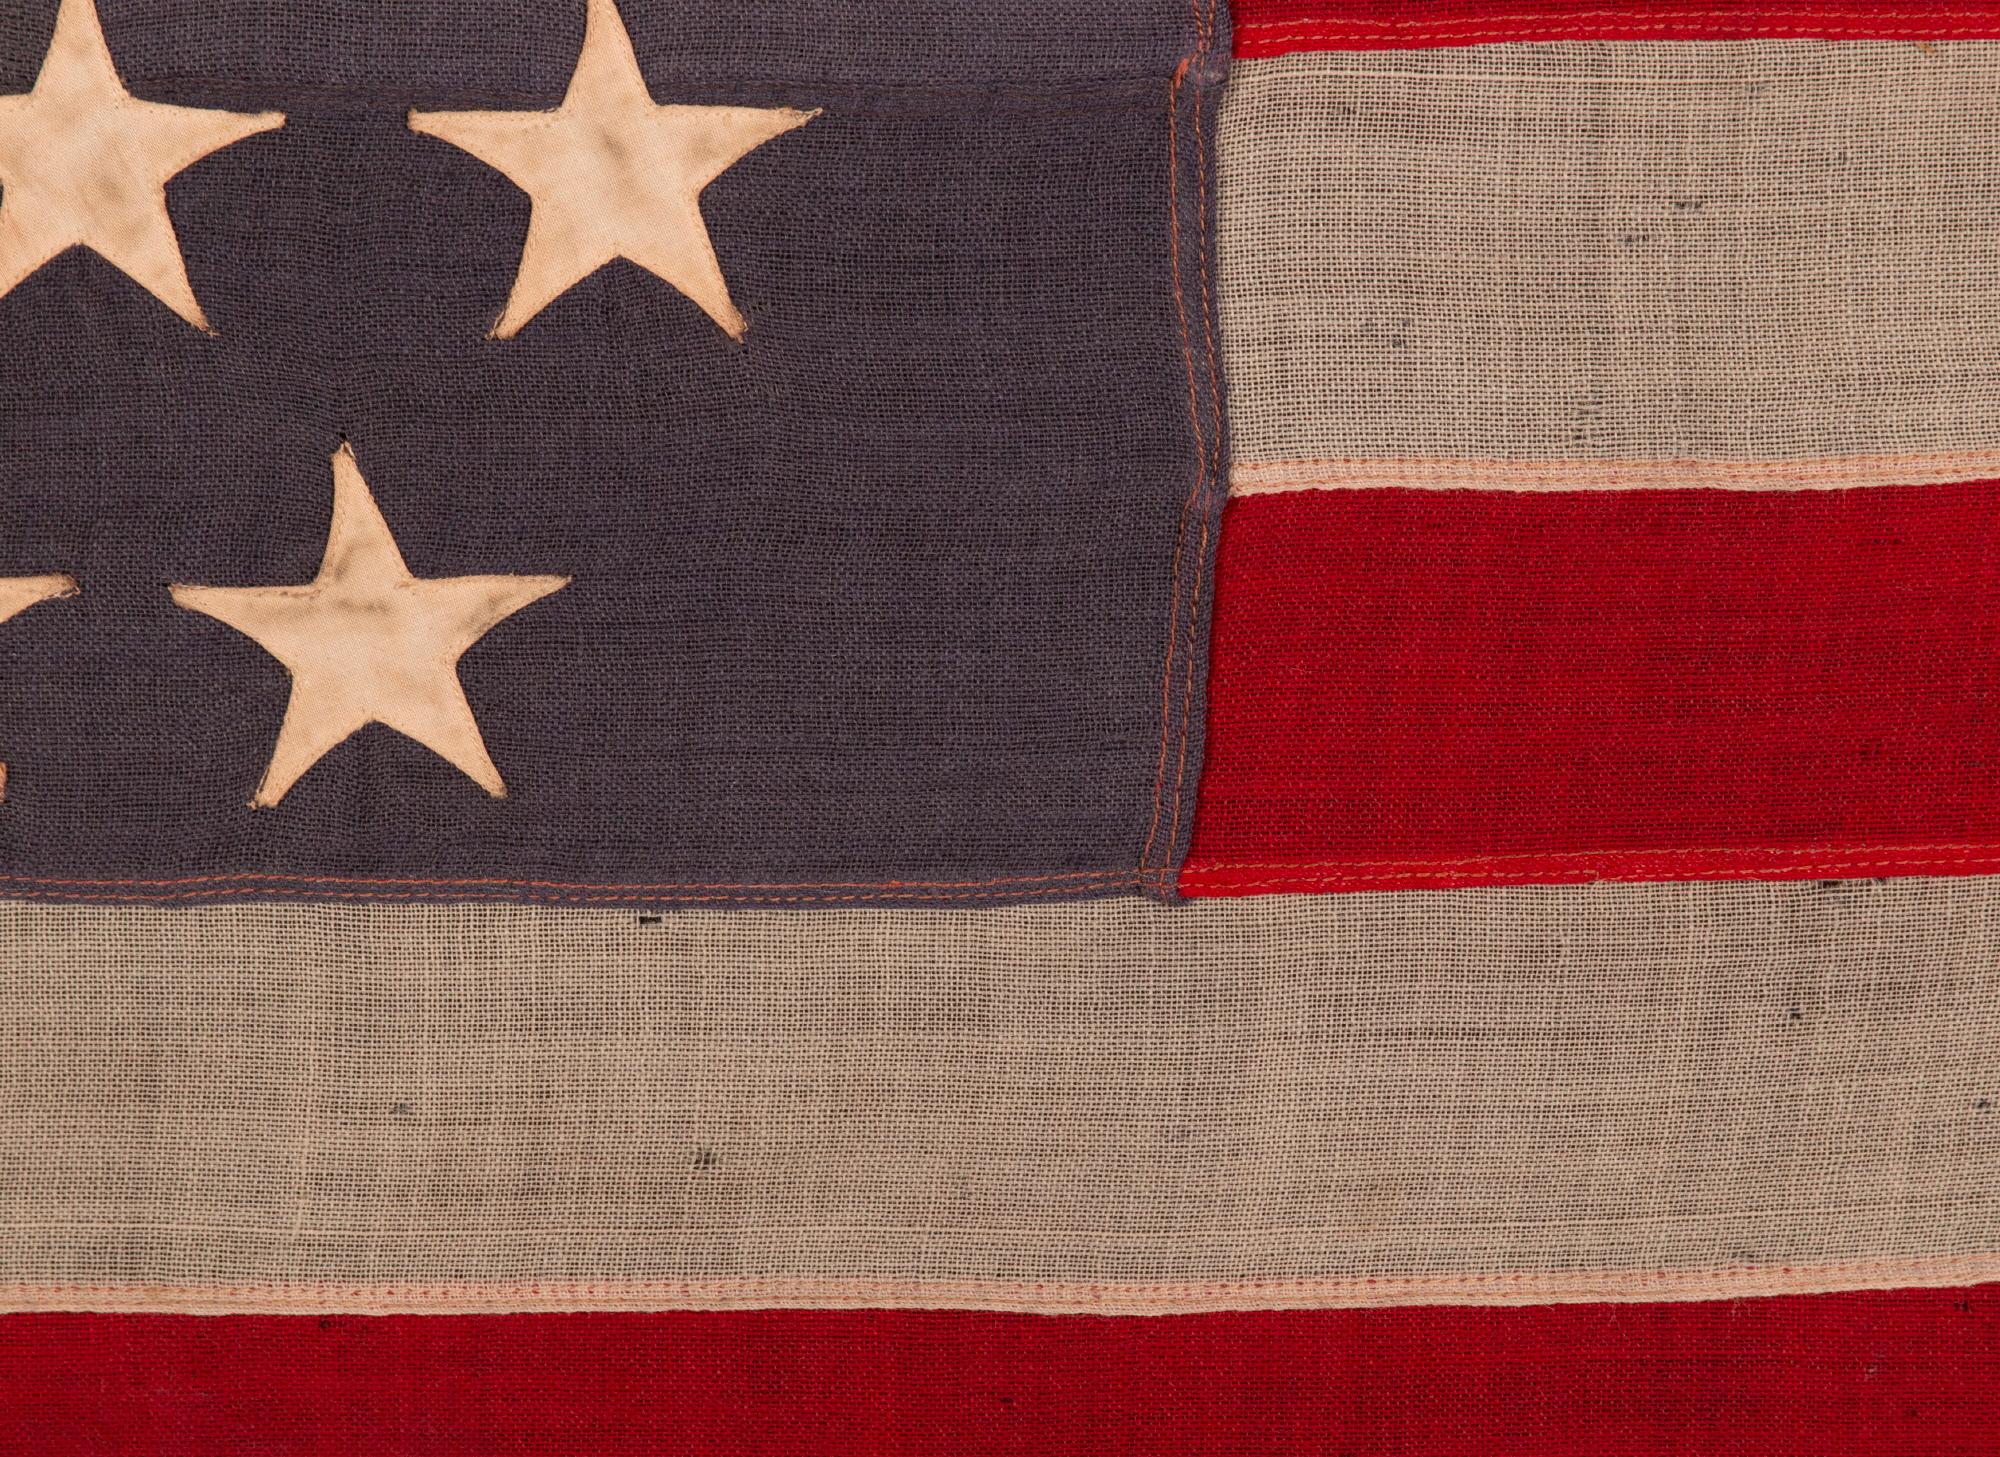 Late 19th Century 45 Star Antique American Flag, with Staggered Rows, Utah Statehood, ca 1890-1896 For Sale